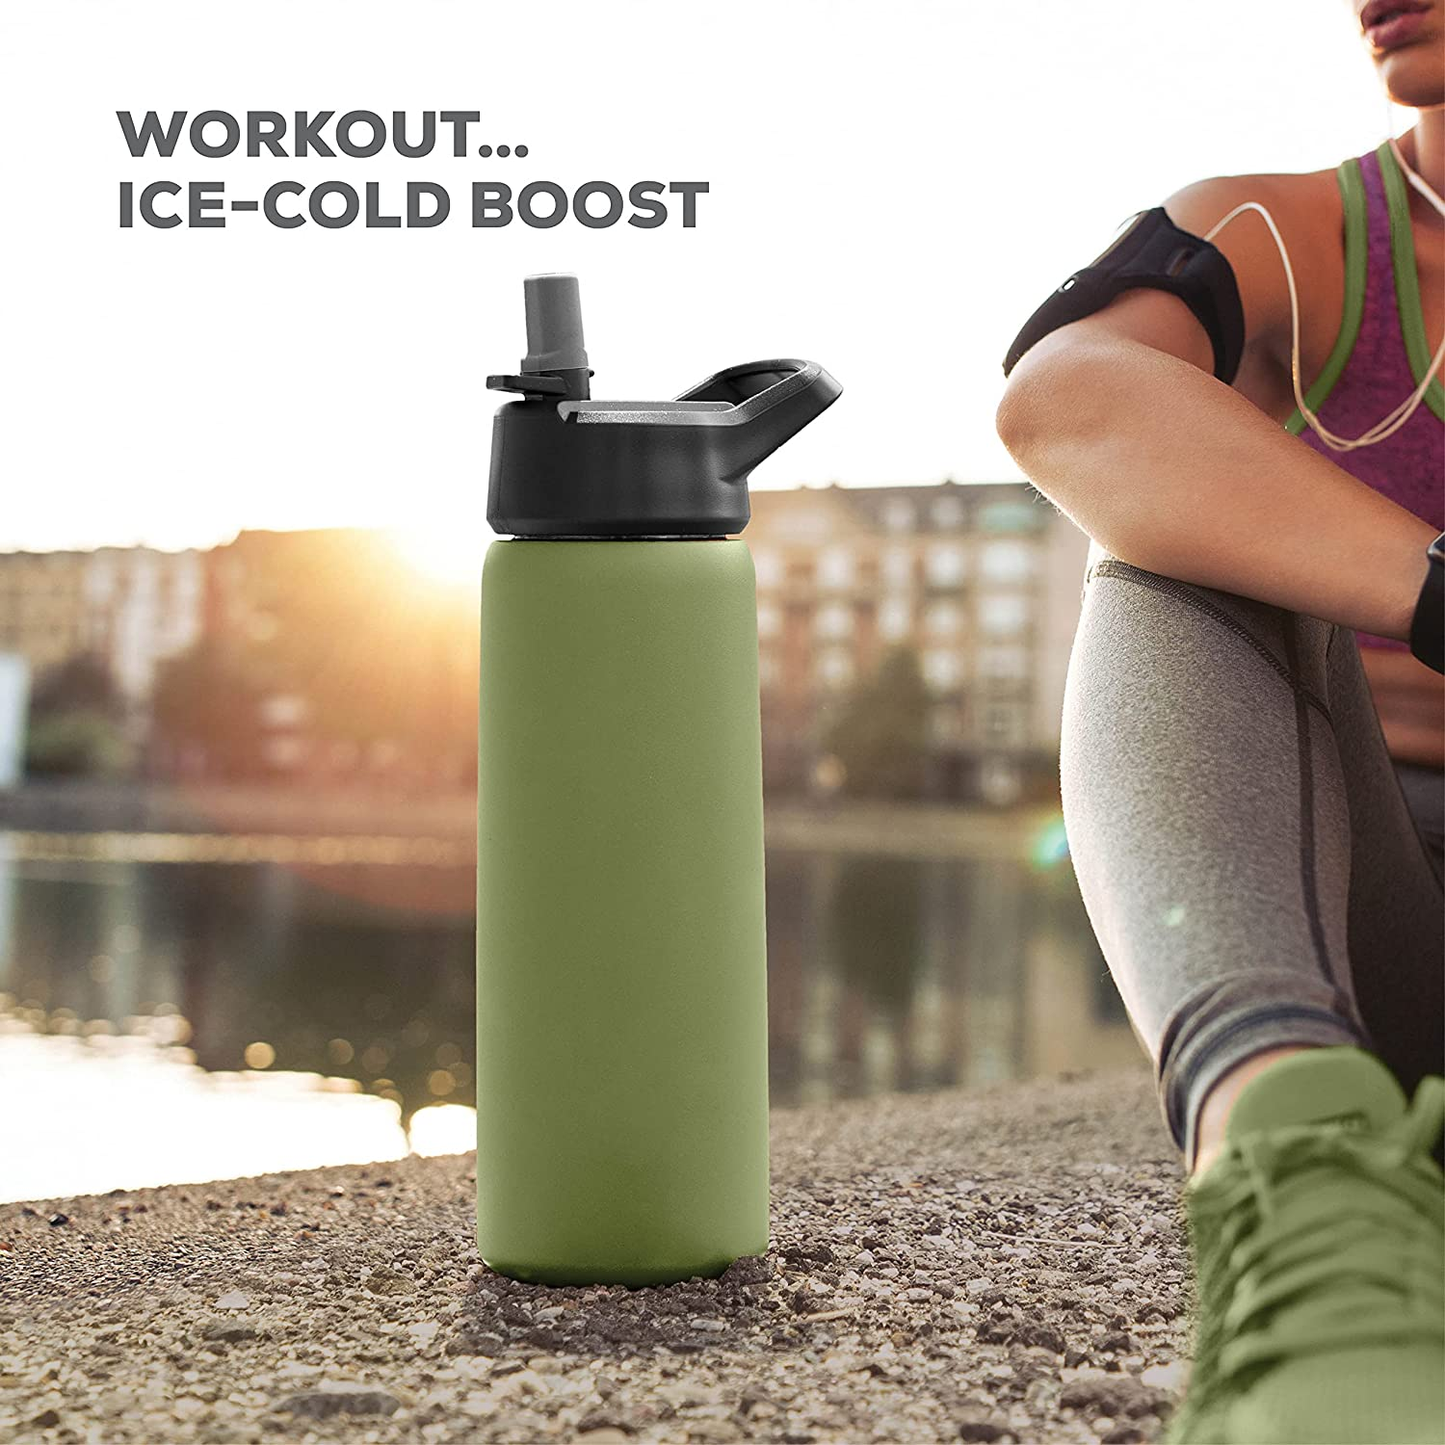 Triple-Insulated Stainless Steel Water Bottle with Straw Lid - Flip-Top Lid - Wide-Mouth Cap (25 Oz) Insulated Water Bottles, Keeps Hot and Cold - Sports Canteen Water Bottle Great for Hiking & Biking